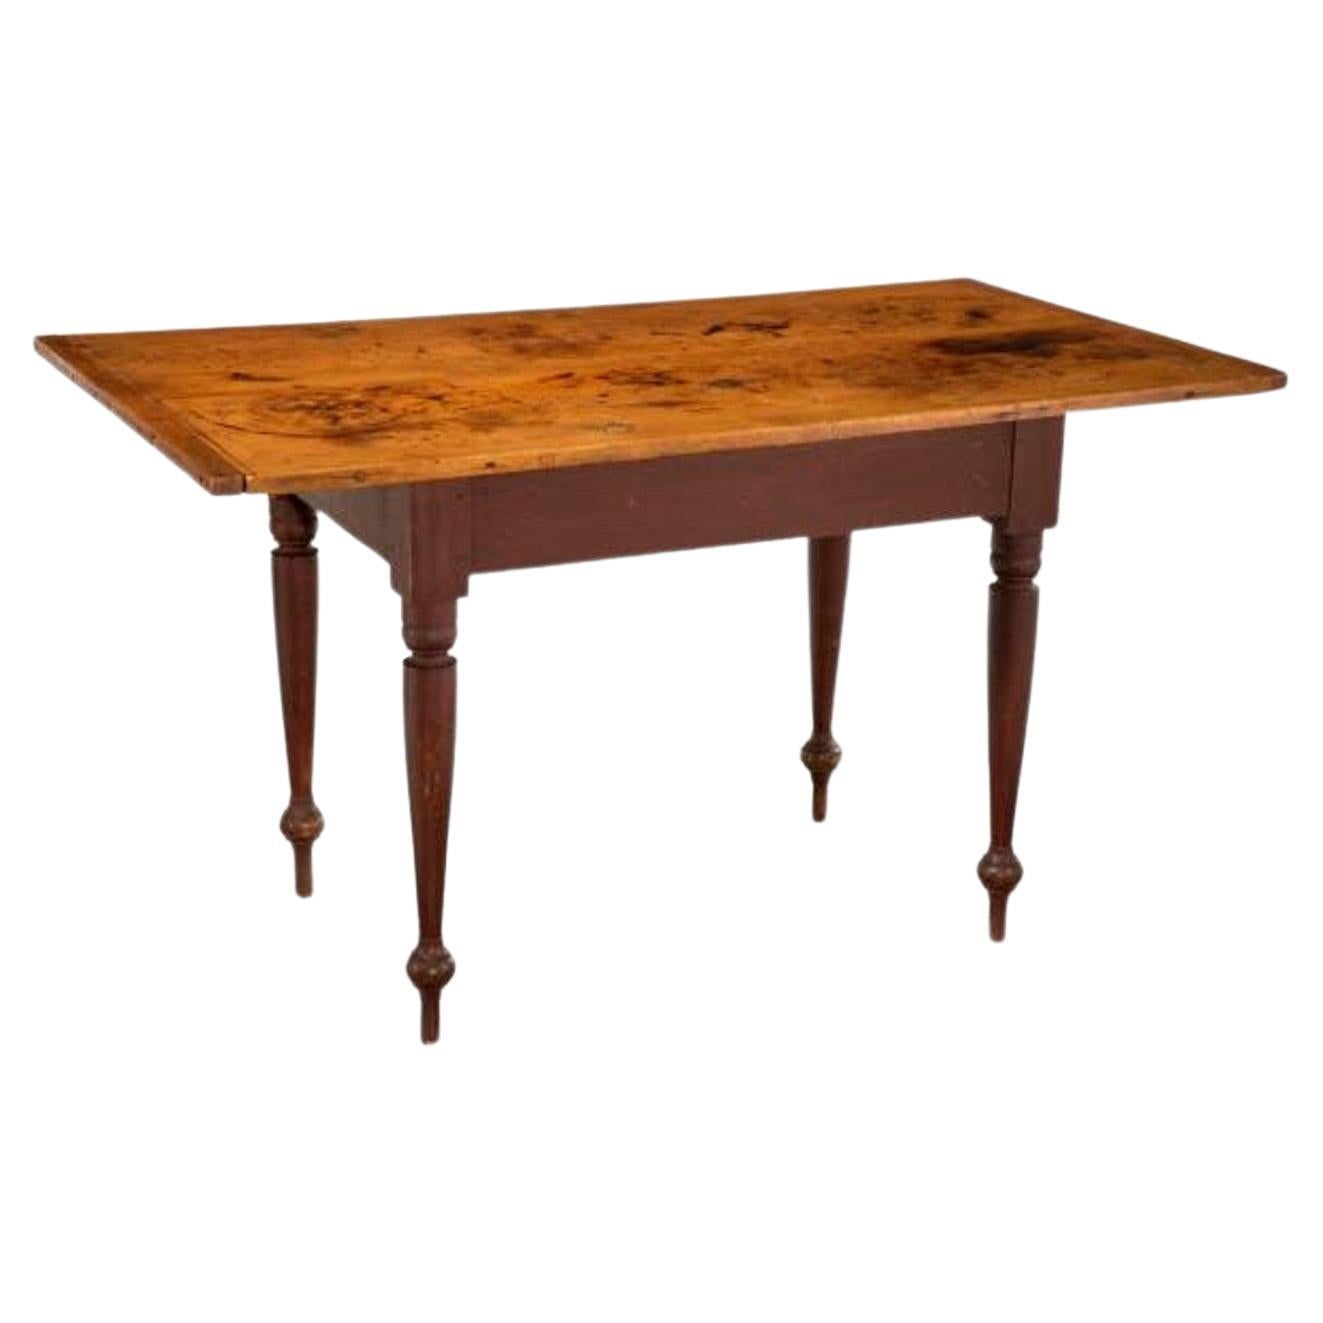 Early 19th Century American Farmhouse Harvest Work Table For Sale